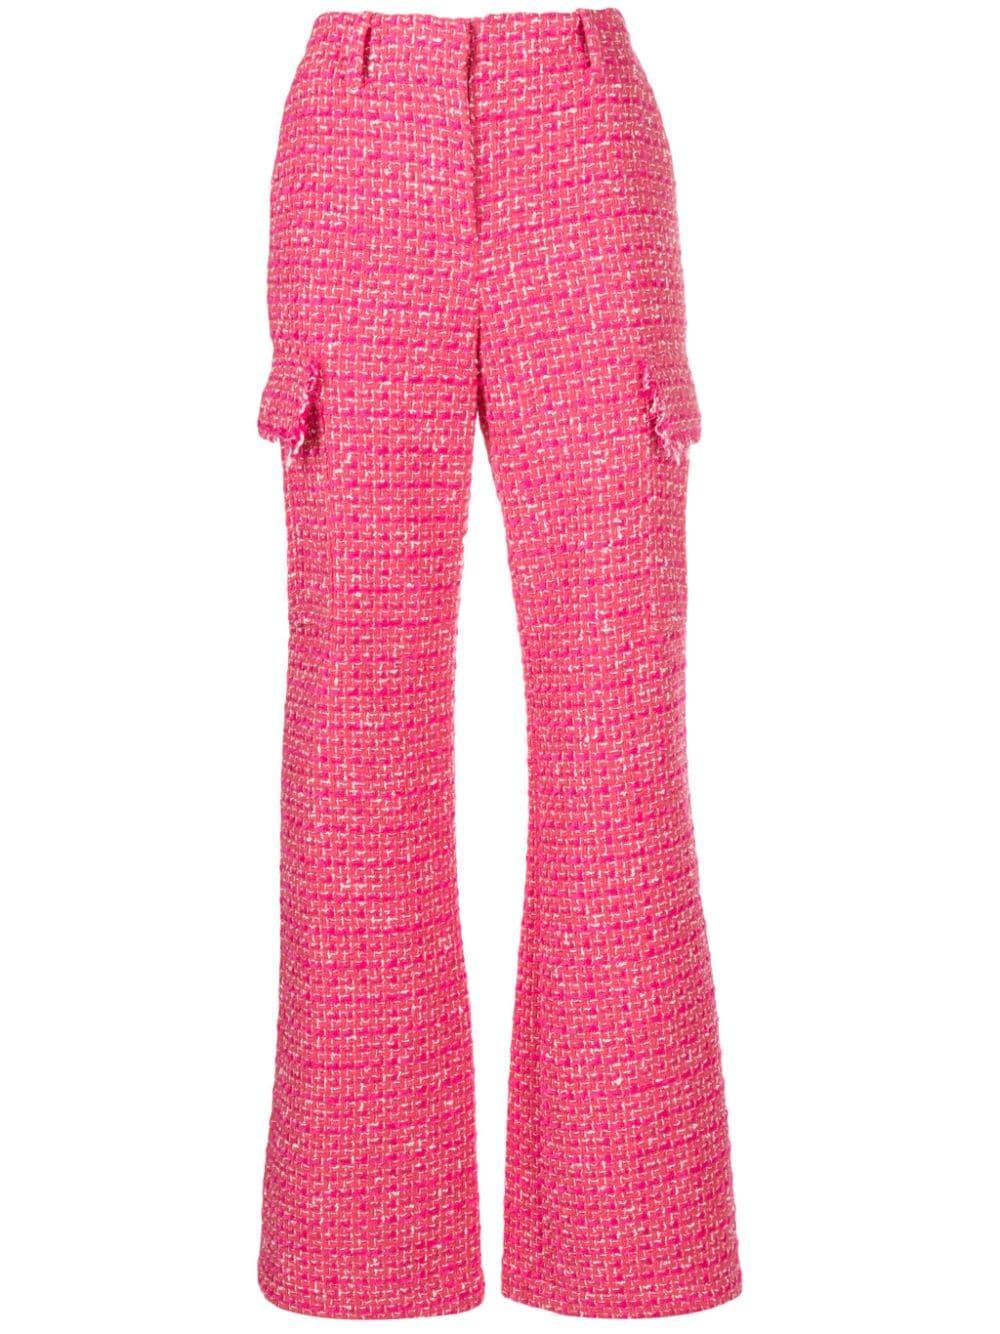 Patrizia Pepe Mid-rise Tweed Straight-leg Trousers in Pink